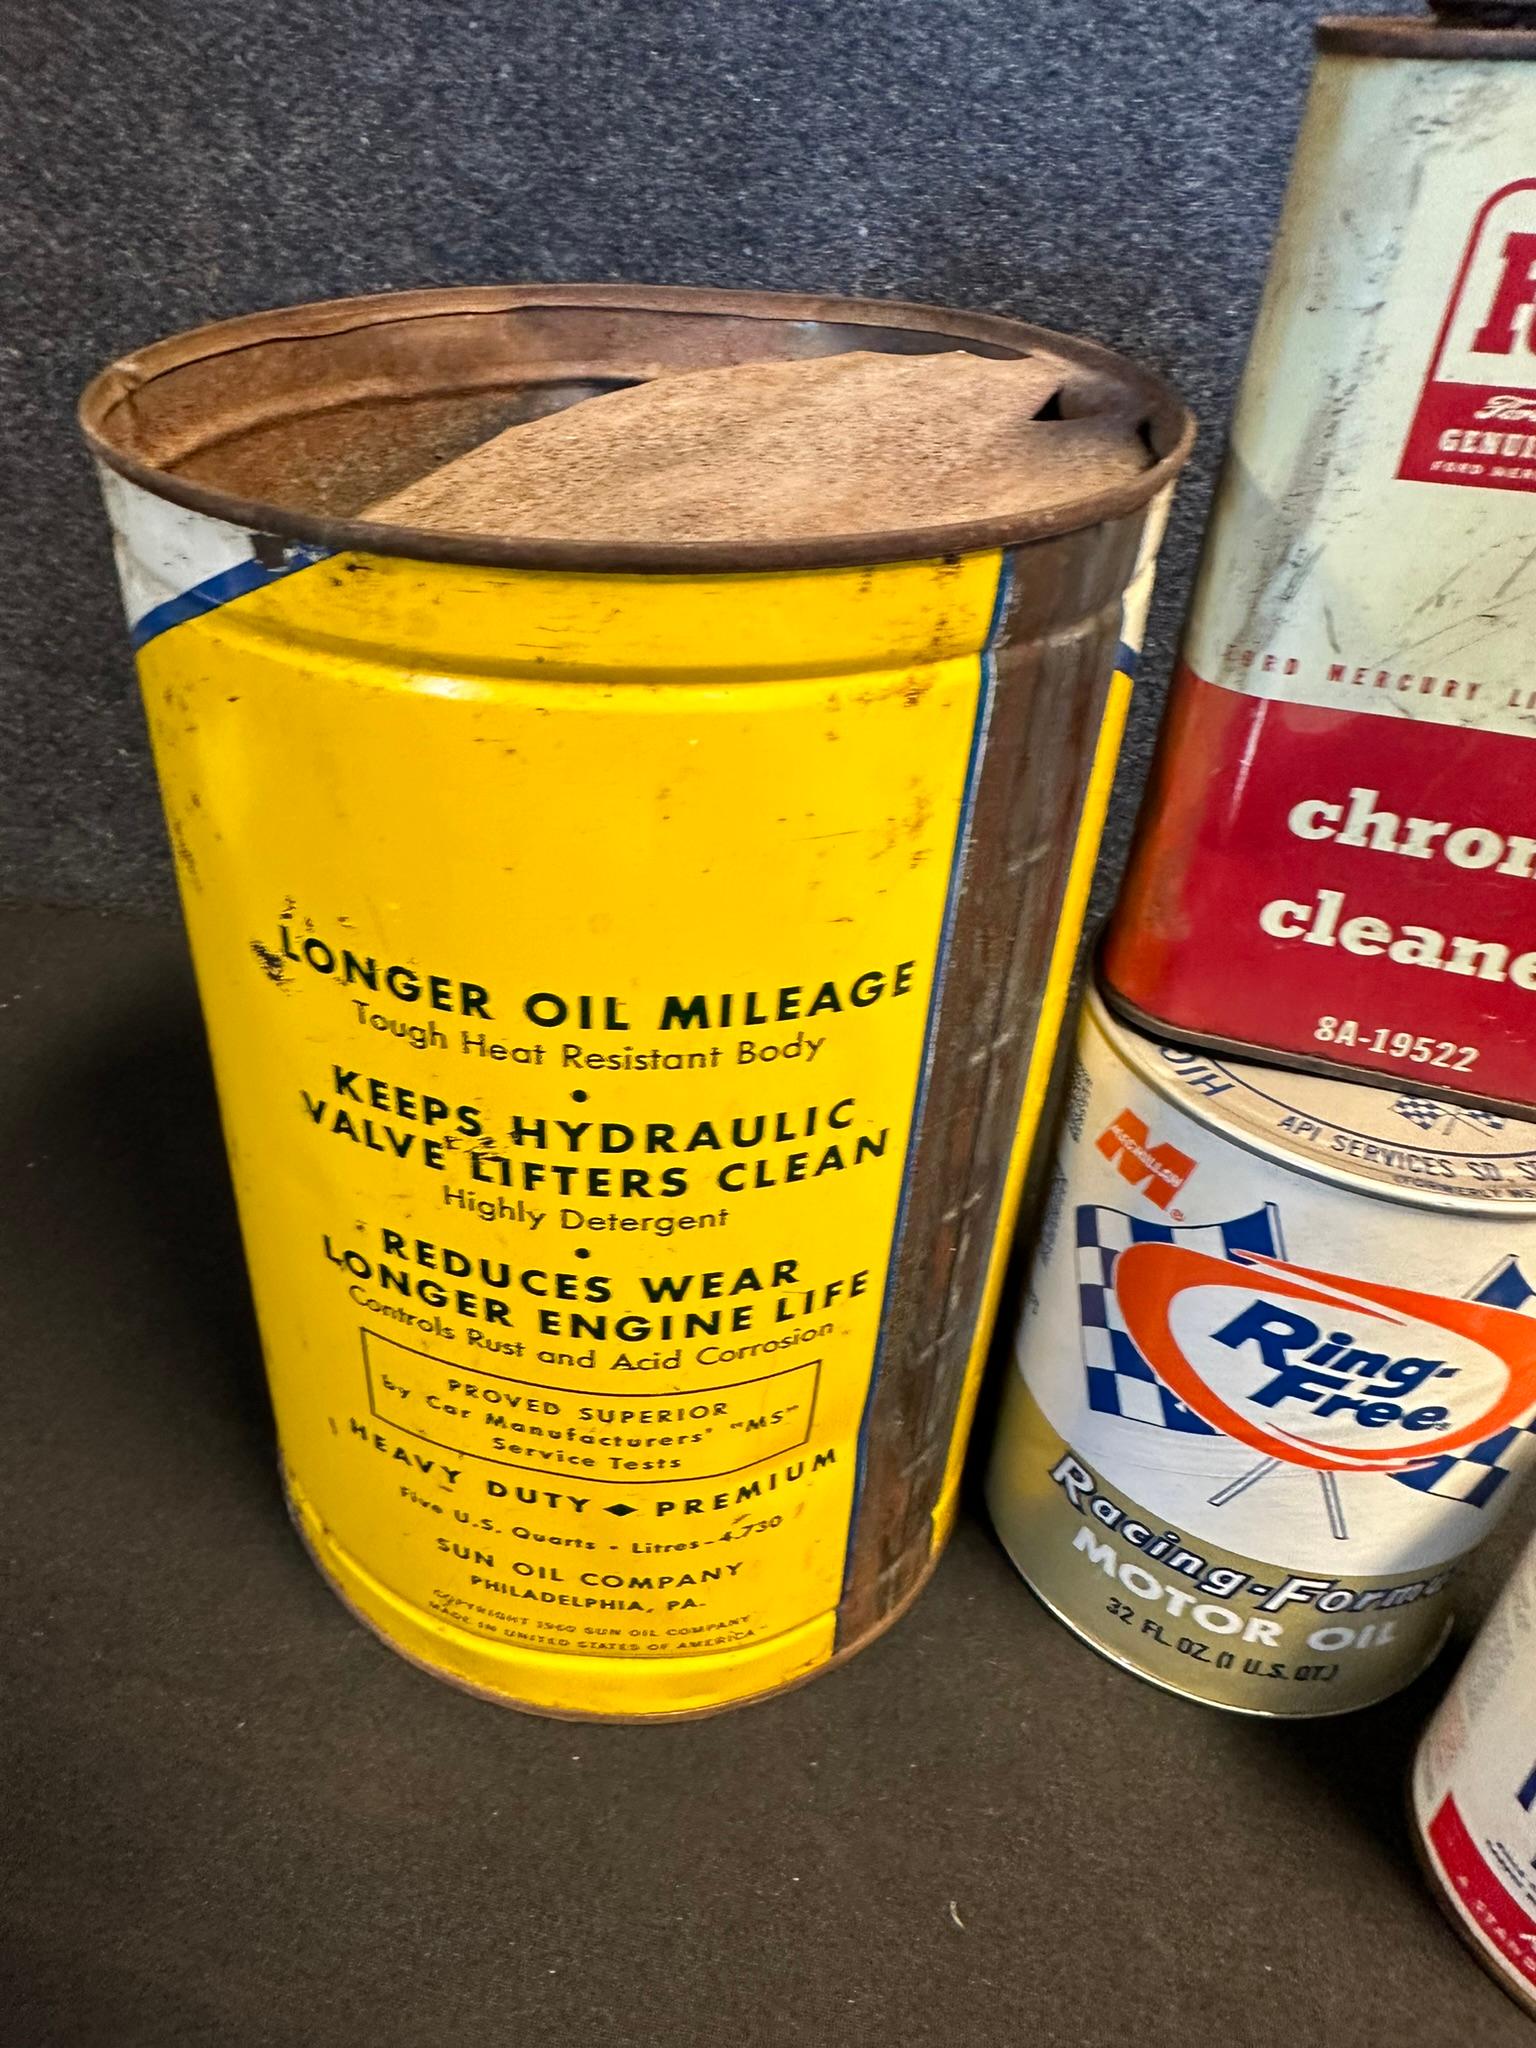 Lot 4 Vintage Oil Cans. Sunoco 5 Quart Dynalube, Fomoco Chrome Cleaner, Ring Free Full Quart, Standa